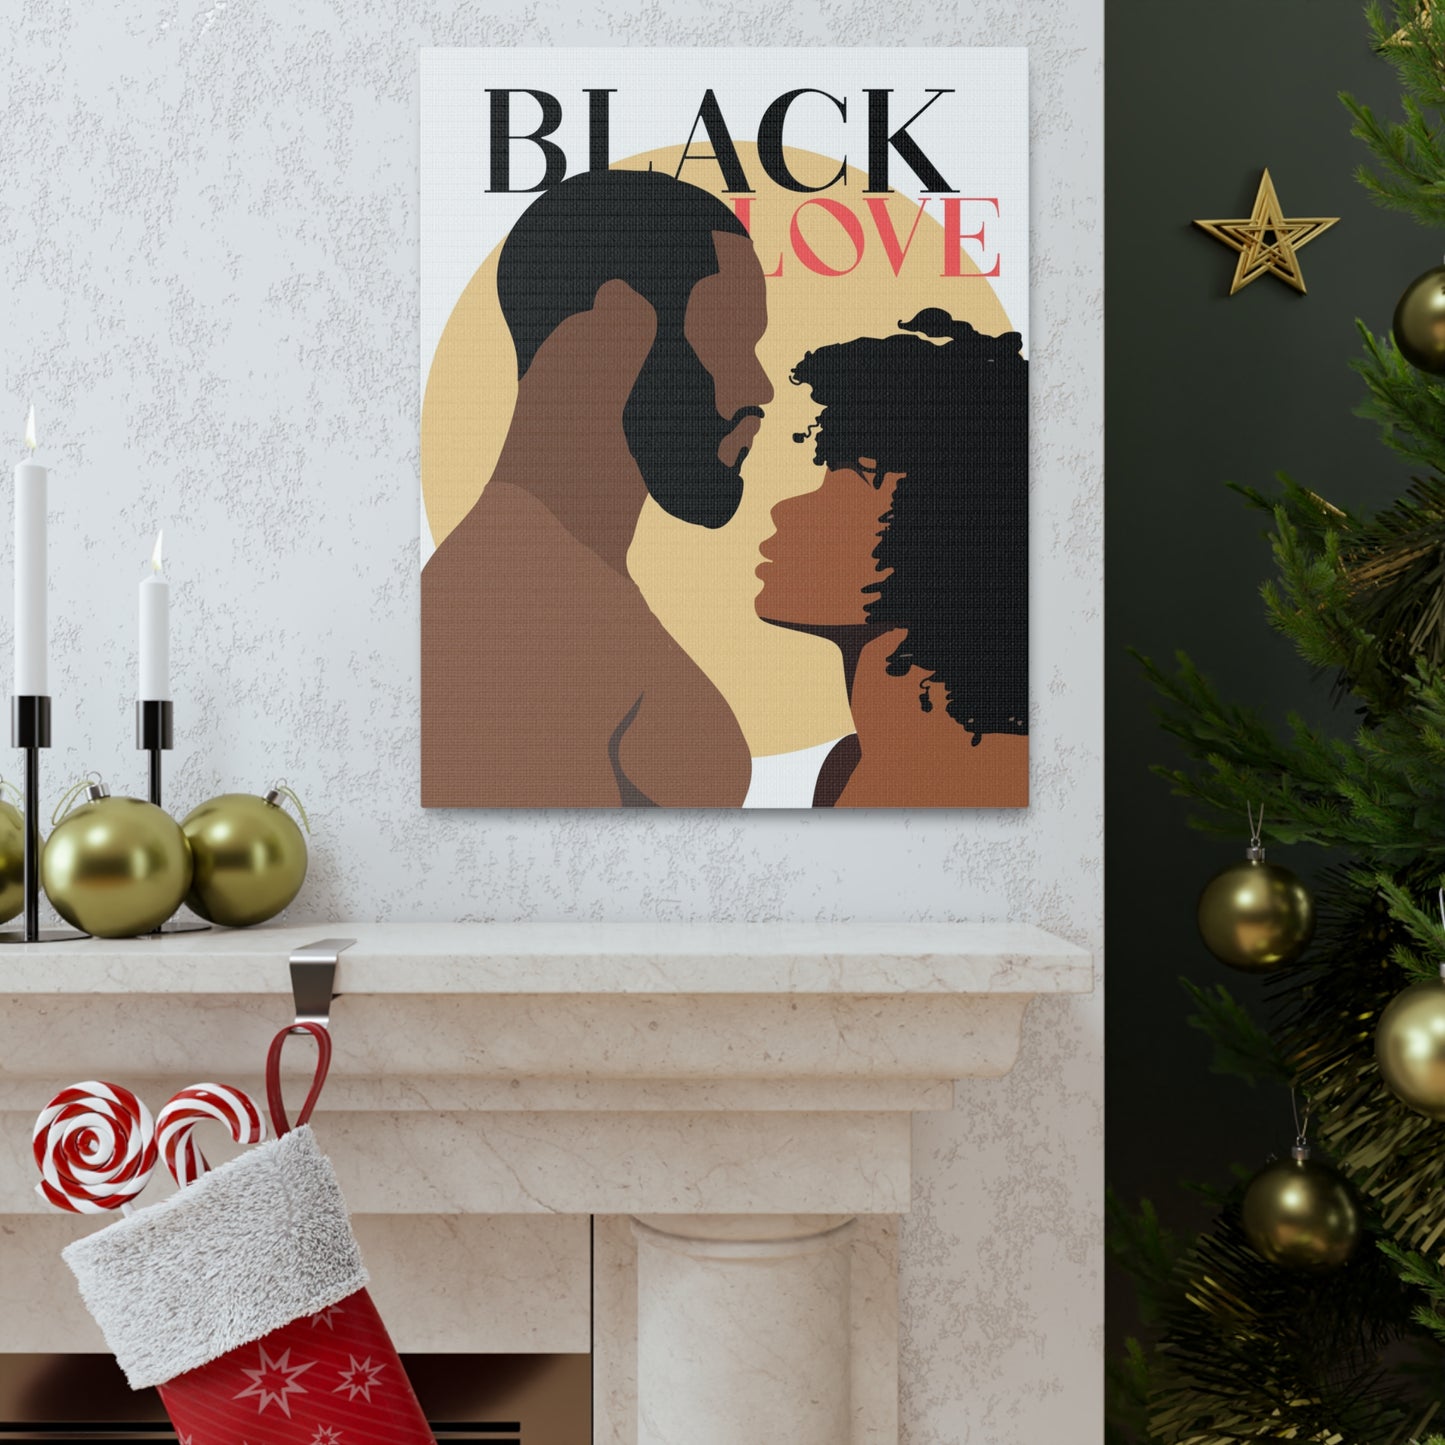 Soulmates Embraced Black Love Wall Art | 16"x20" Afrocentric Romantic Canvas Print